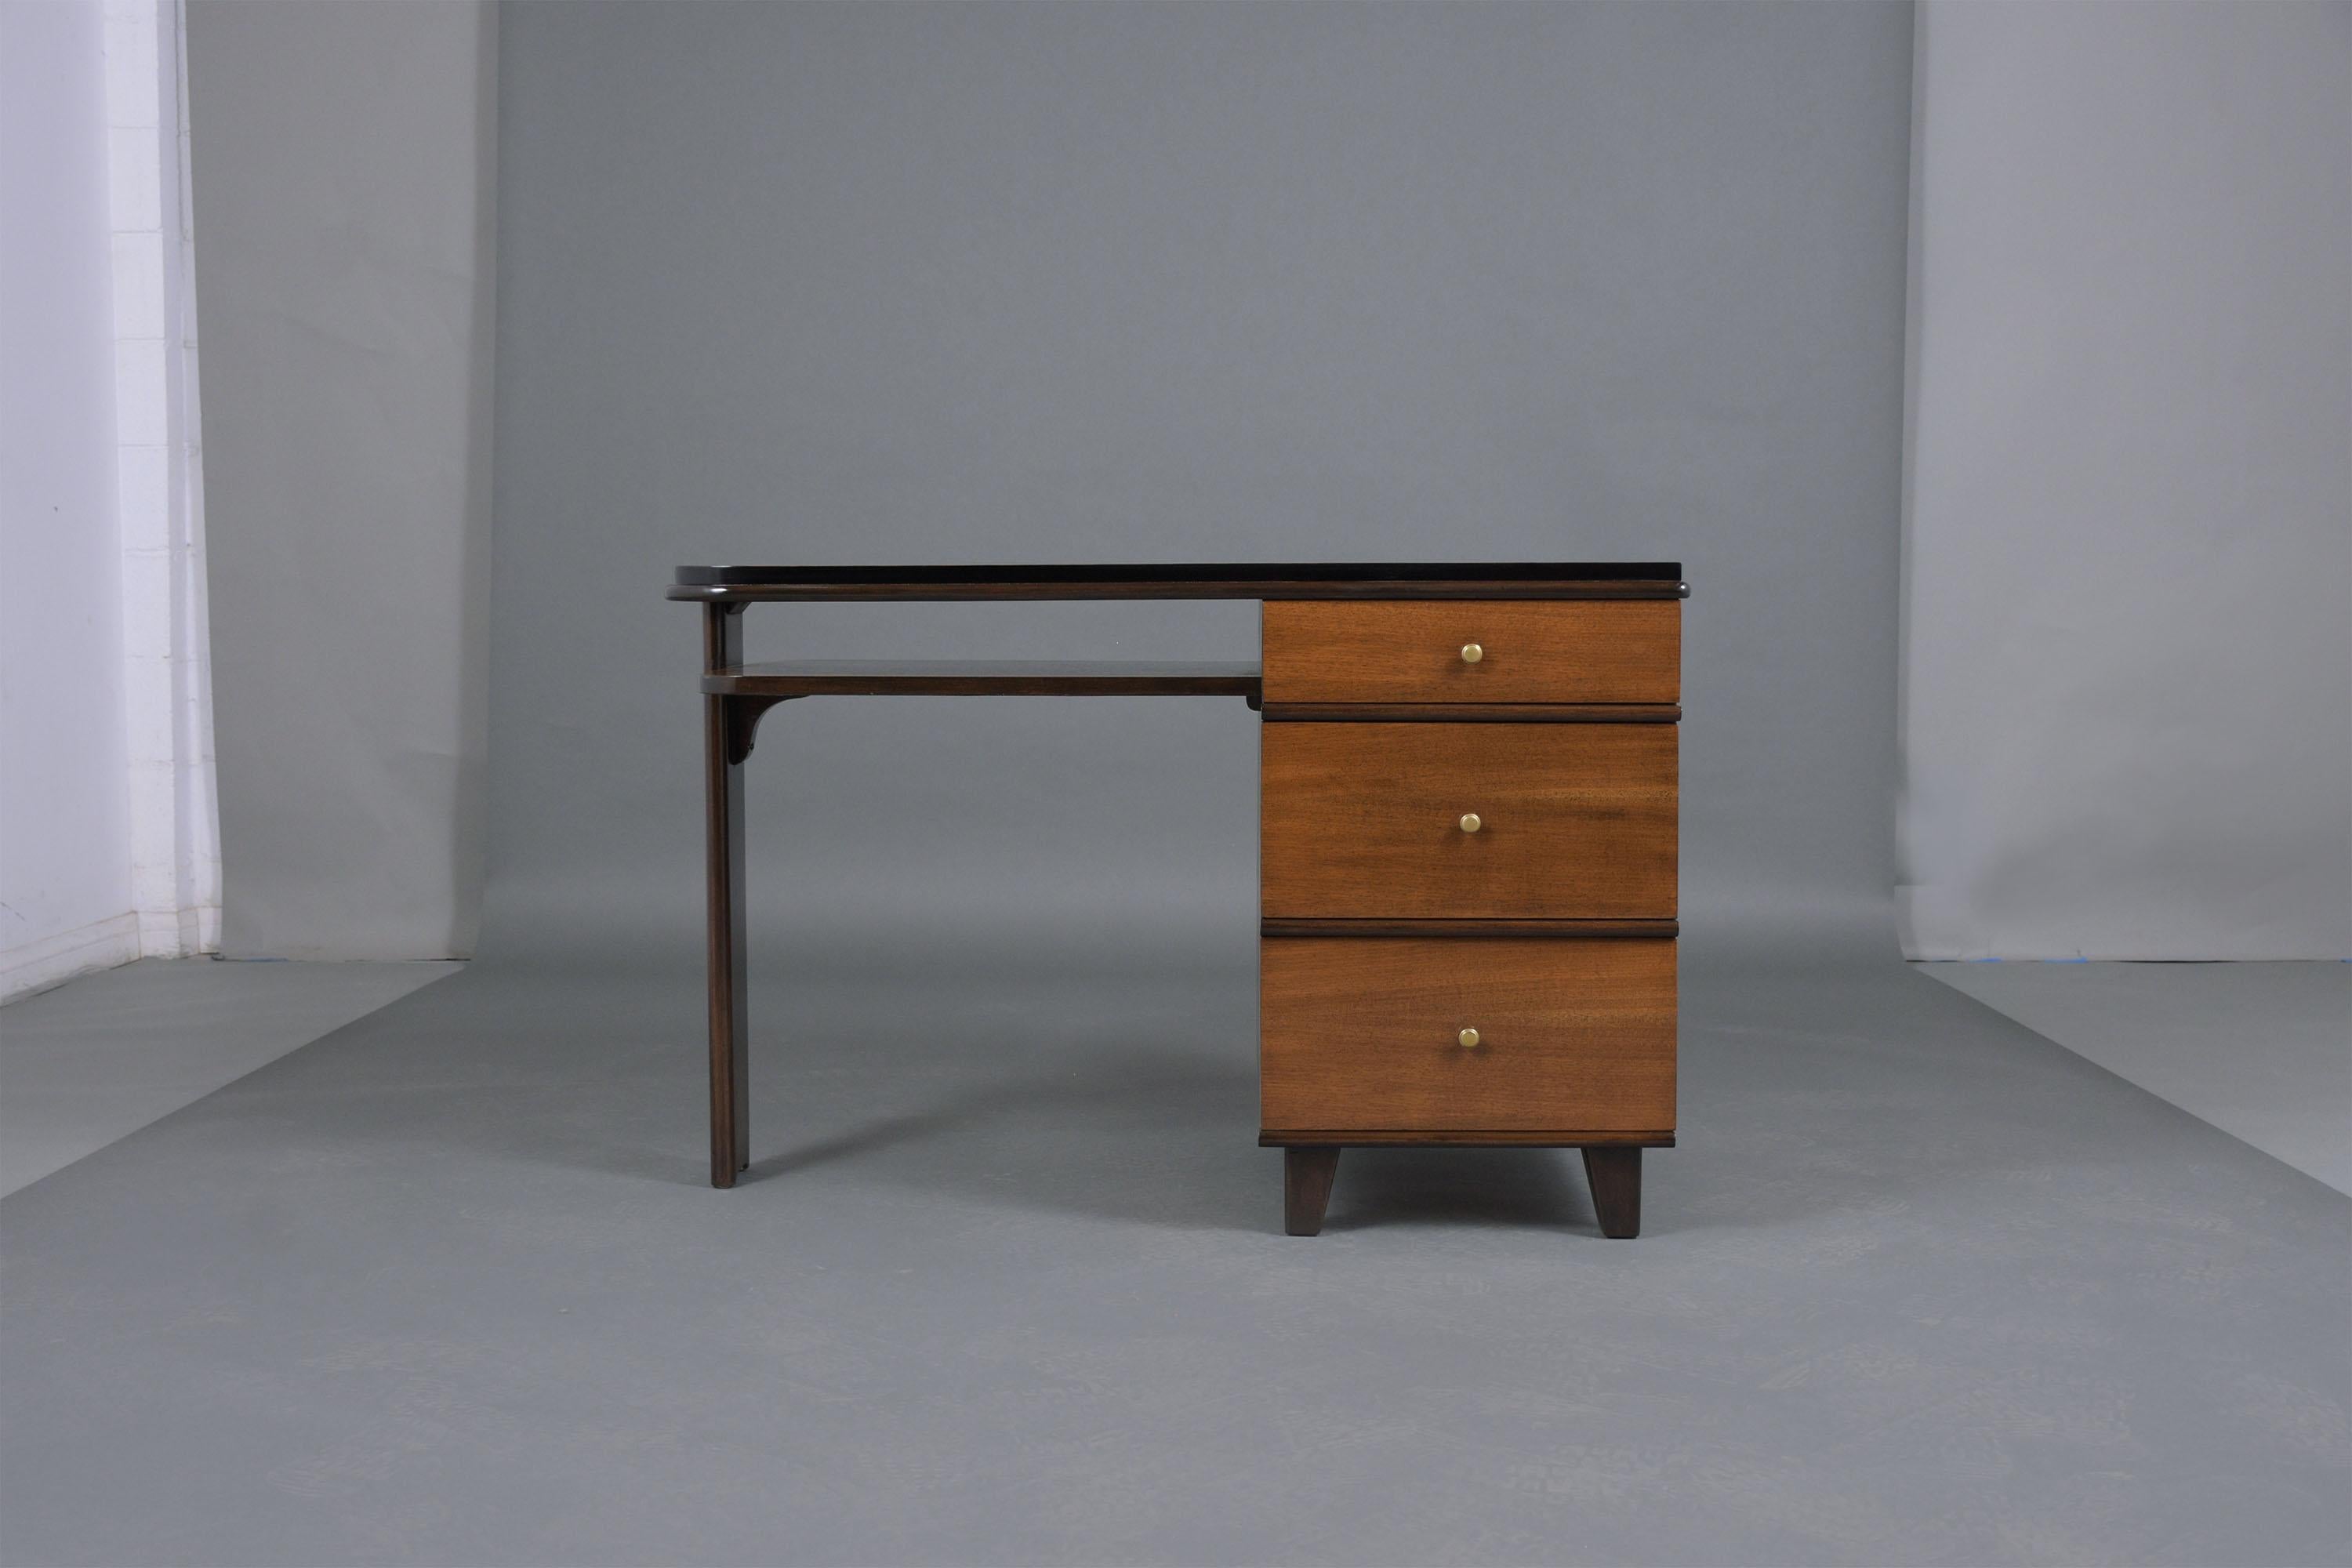 Immerse yourself in the elegance of the past with our 1950s Art Deco Pedestal Desk, a perfect blend of historical charm and modern restoration. This piece has been expertly crafted from wood and professionally restored by our team of skilled